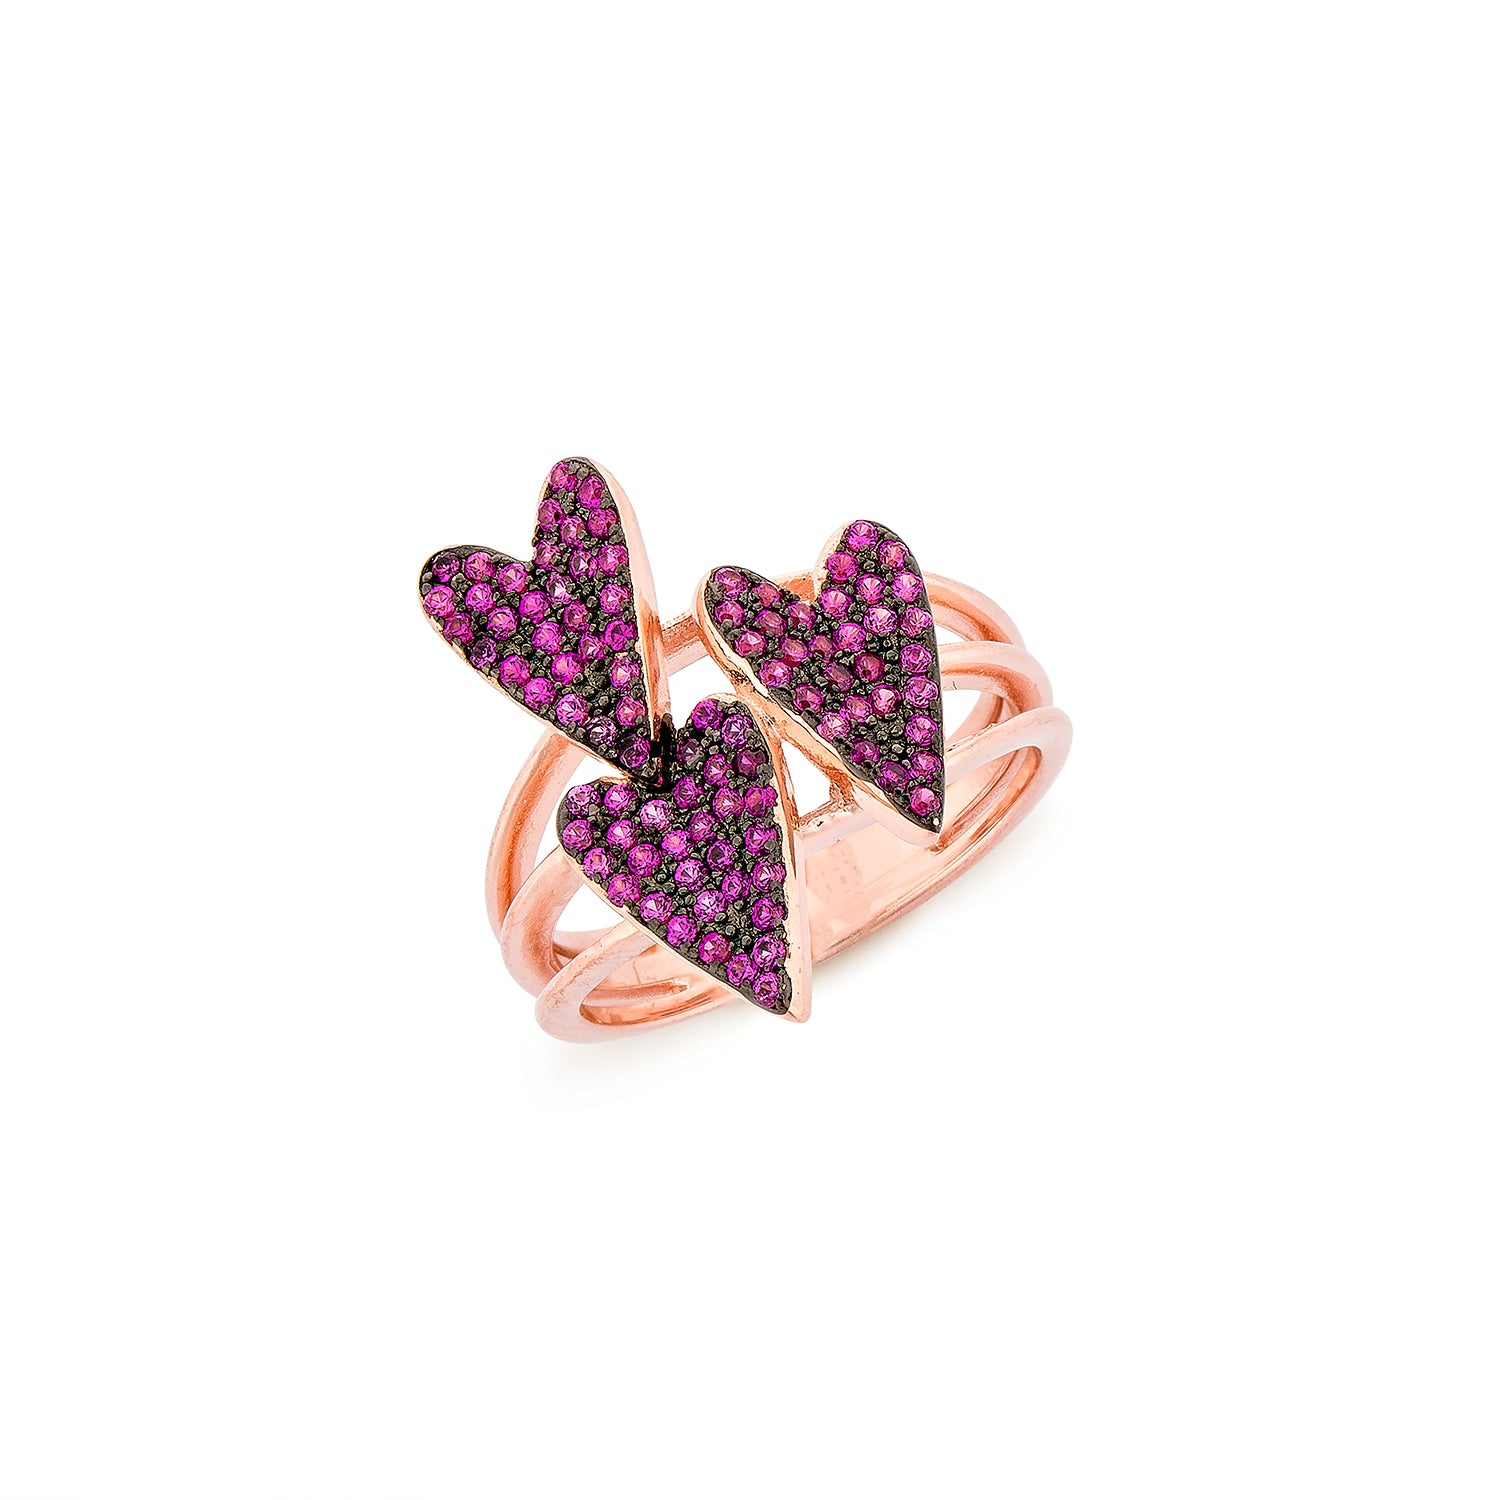 3 Hearts Ring - Pinkgold with Pink CZ